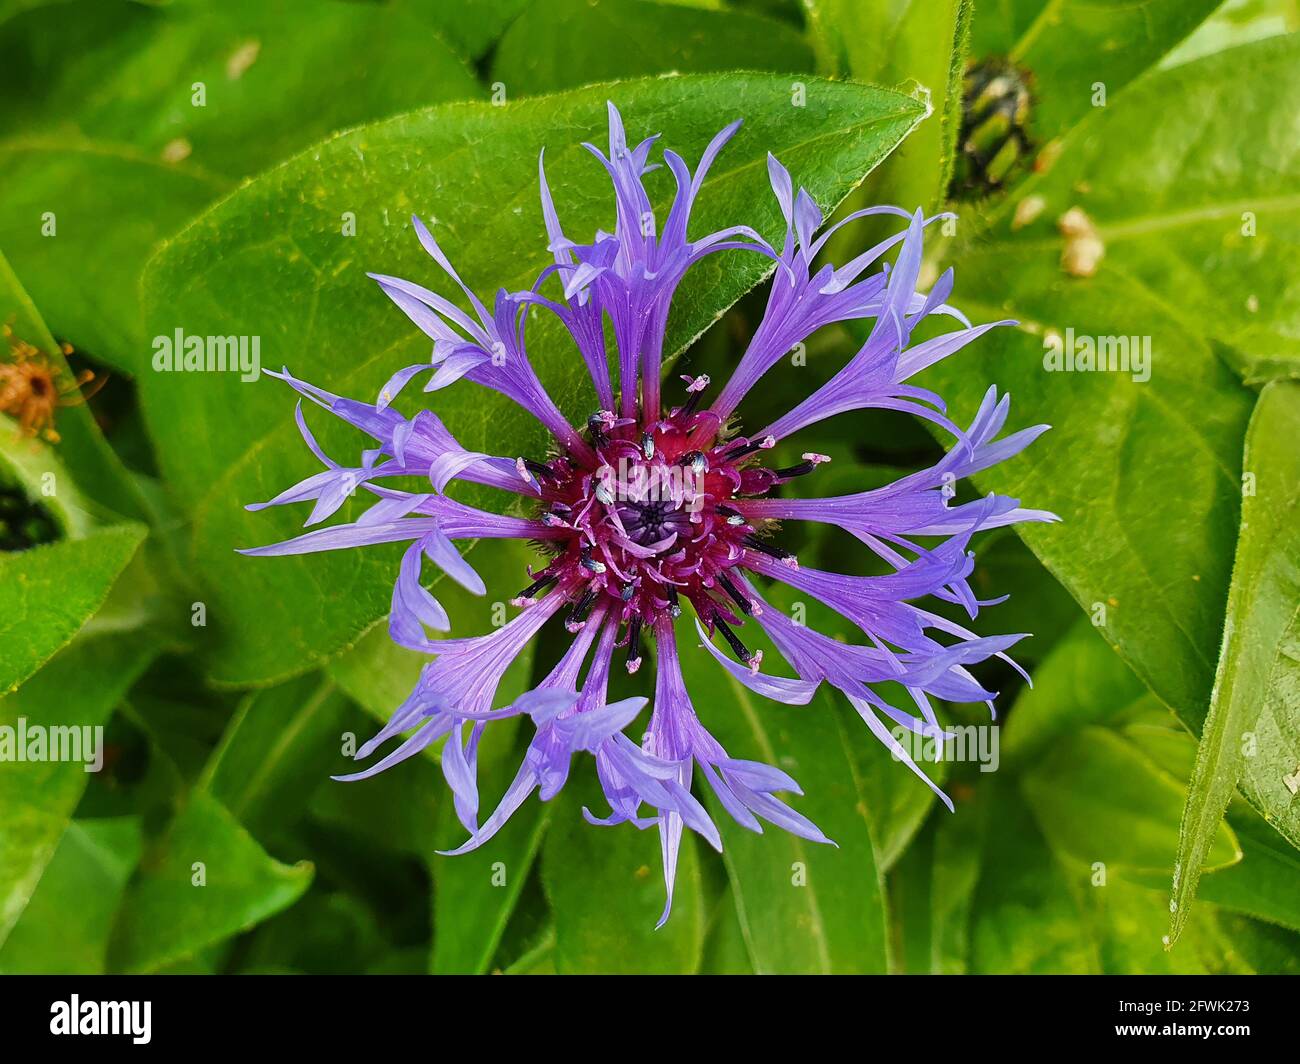 Centaurea montana a summer flowering plant with a blue summertime flower commonly known as Mountain bluet, stock photo image Stock Photo